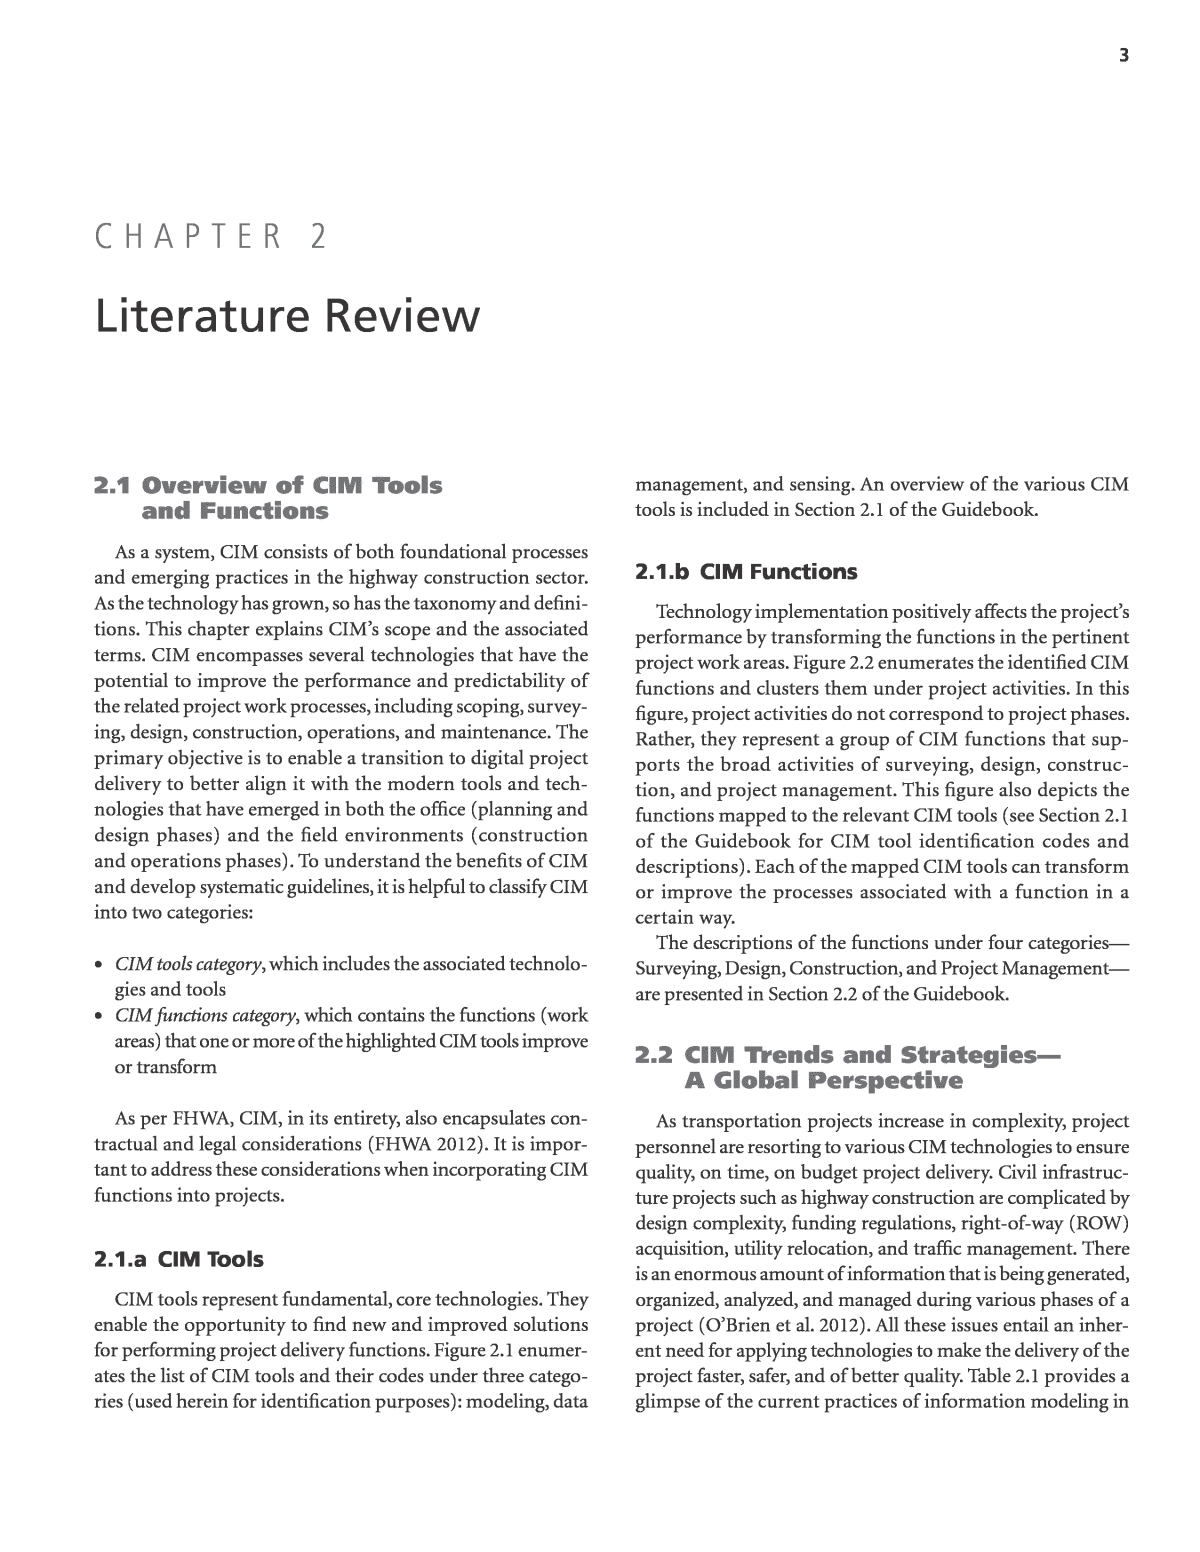 what is literature review section